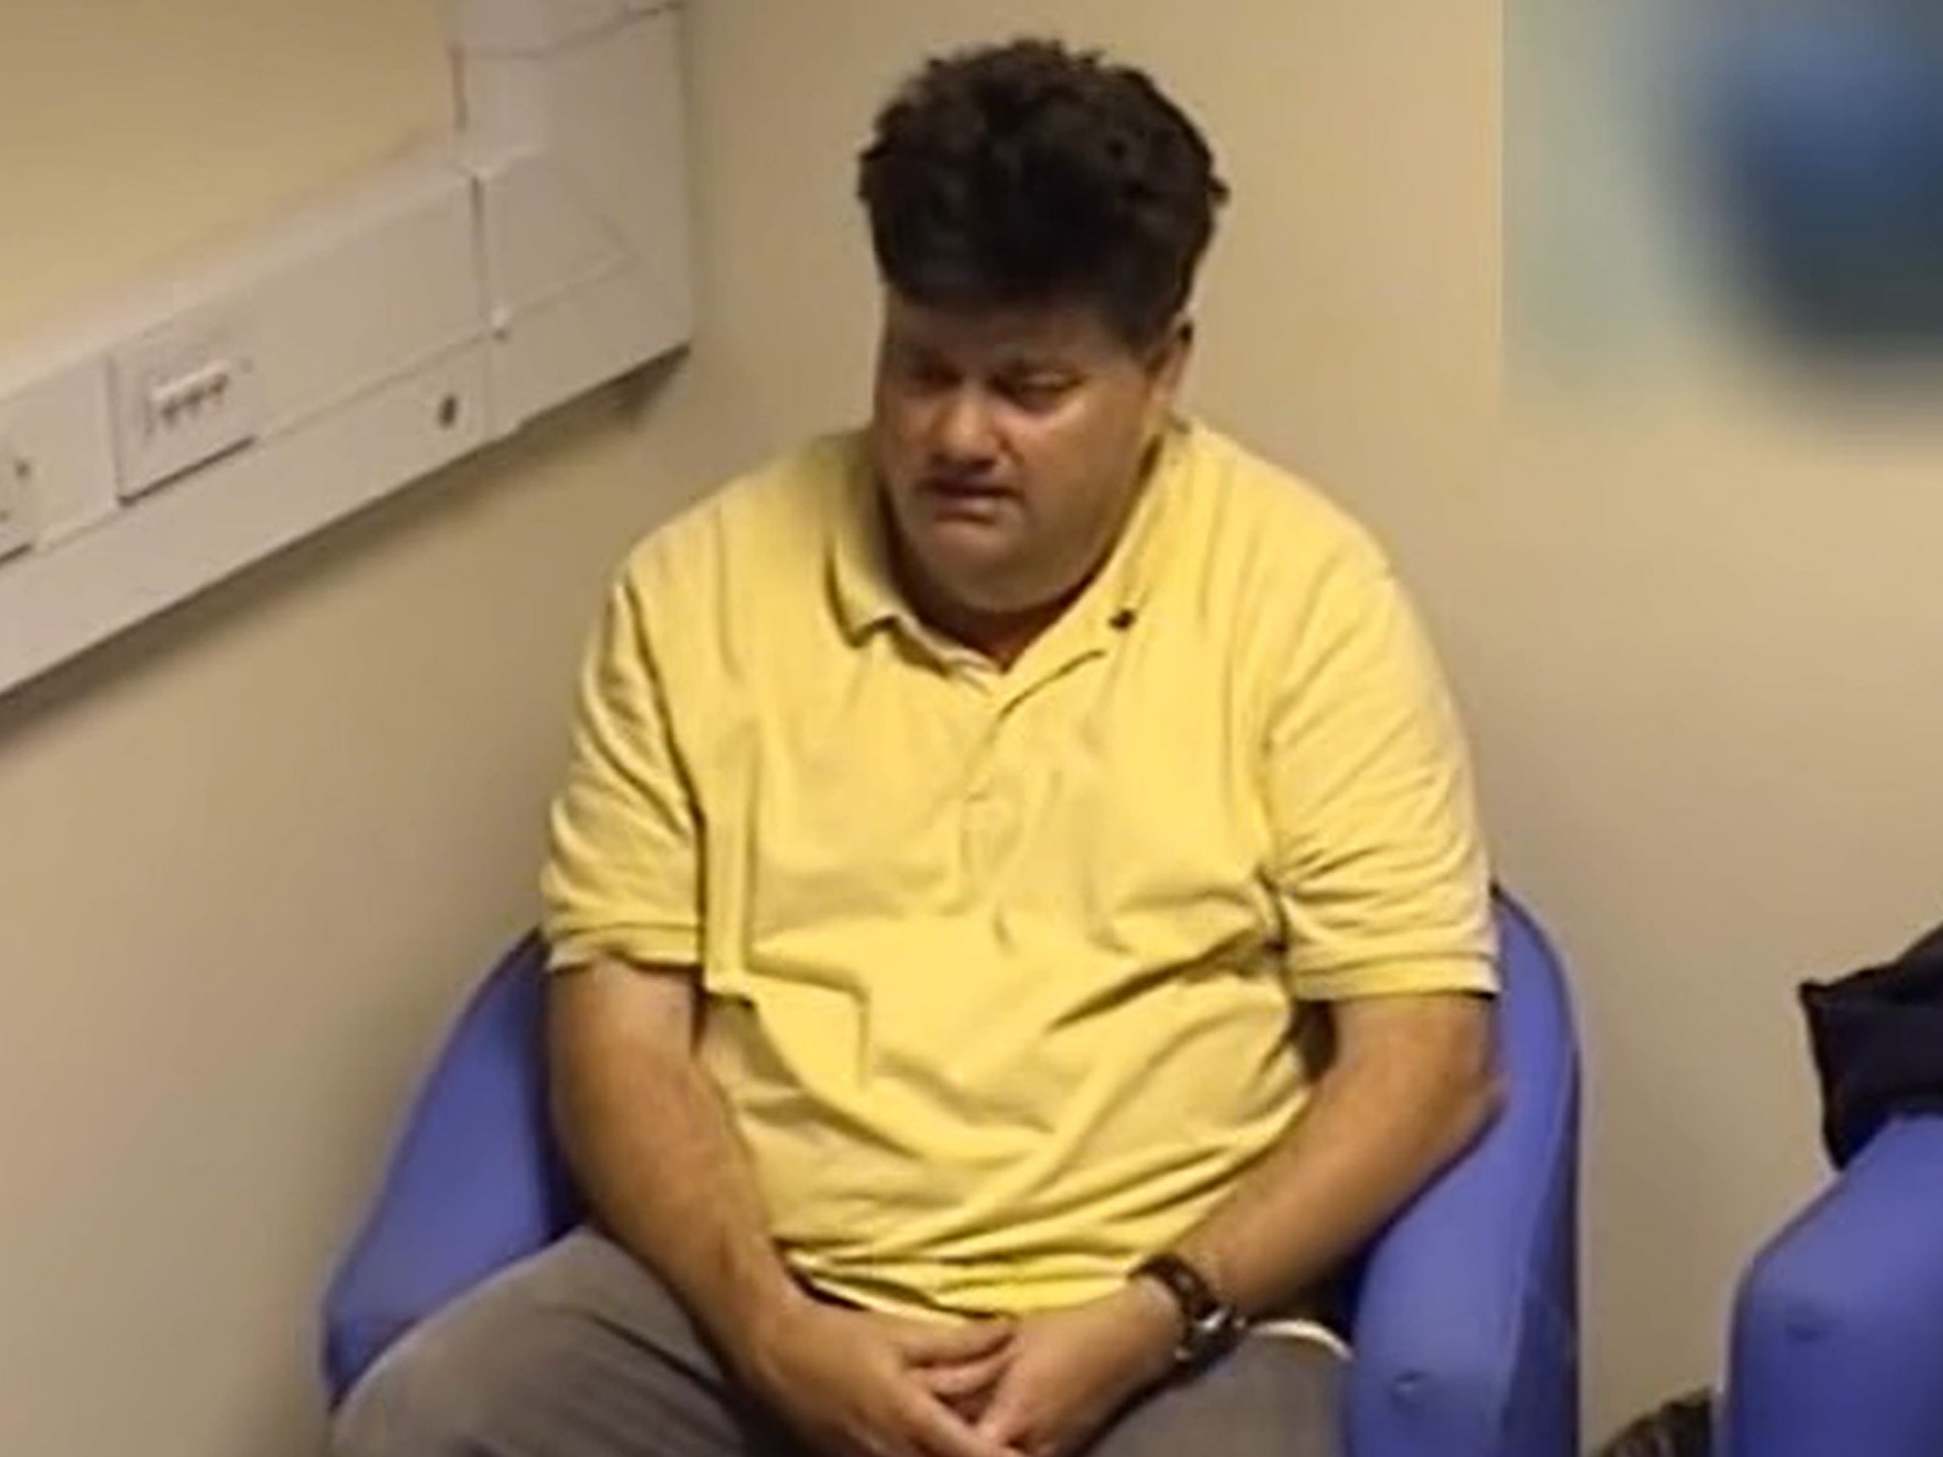 Carl Beech interviewed by police in Crown Prosecution Service video played in court